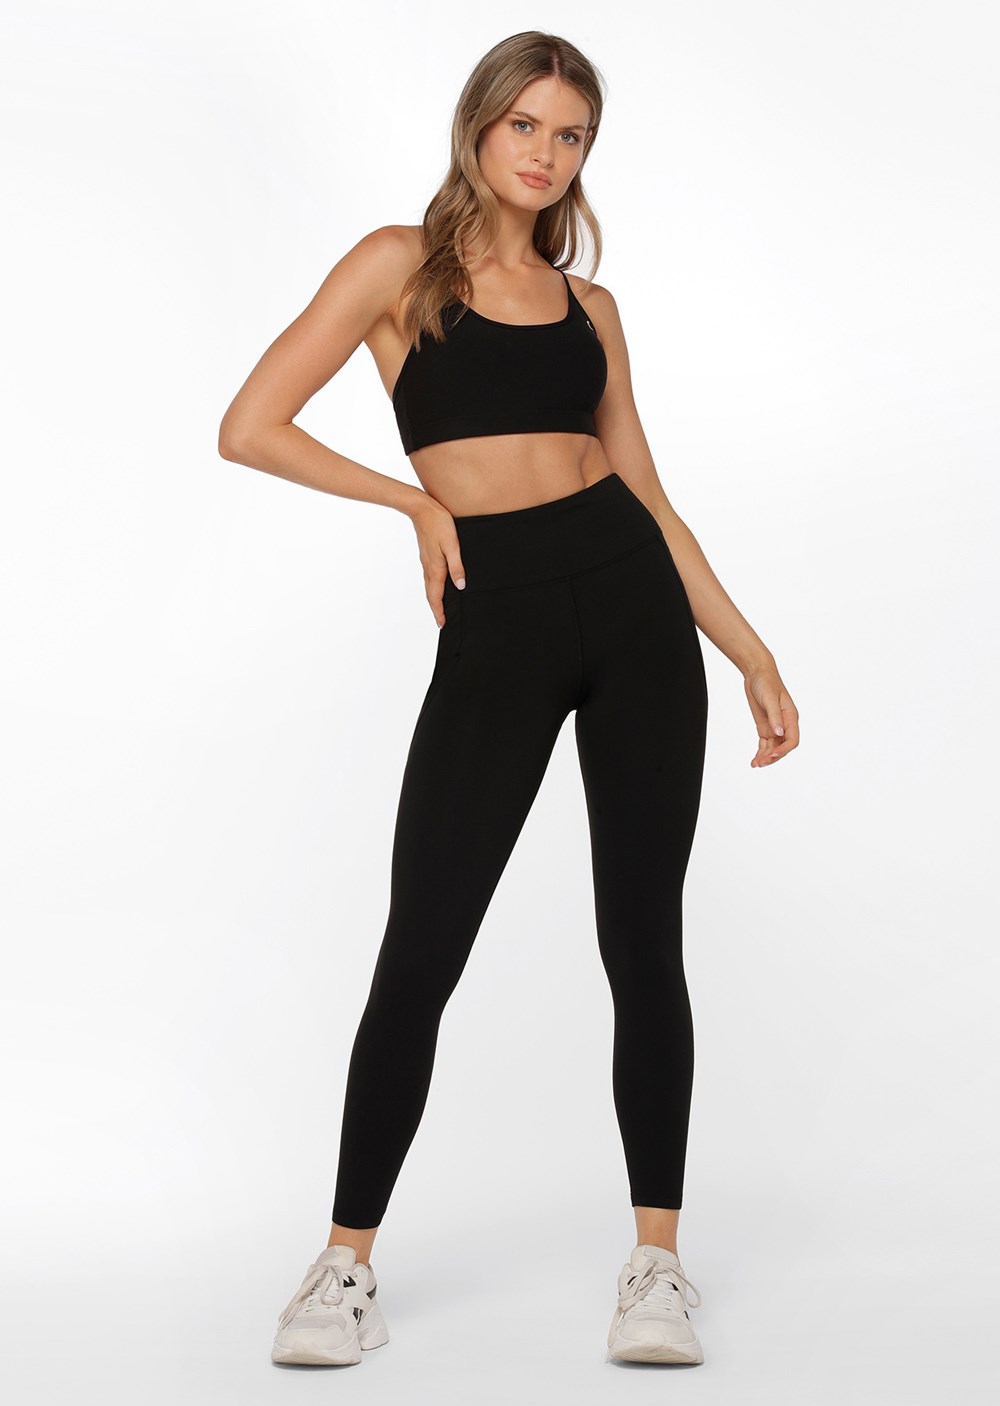 Lorna Jane Active - Did someone say Amy Leggings for $75.00? Run, don't  walk! This offer is running for a limited time only ‍🛒🏃🏼‍♀️ Shop now:  cur.lt/qfrlol6ka